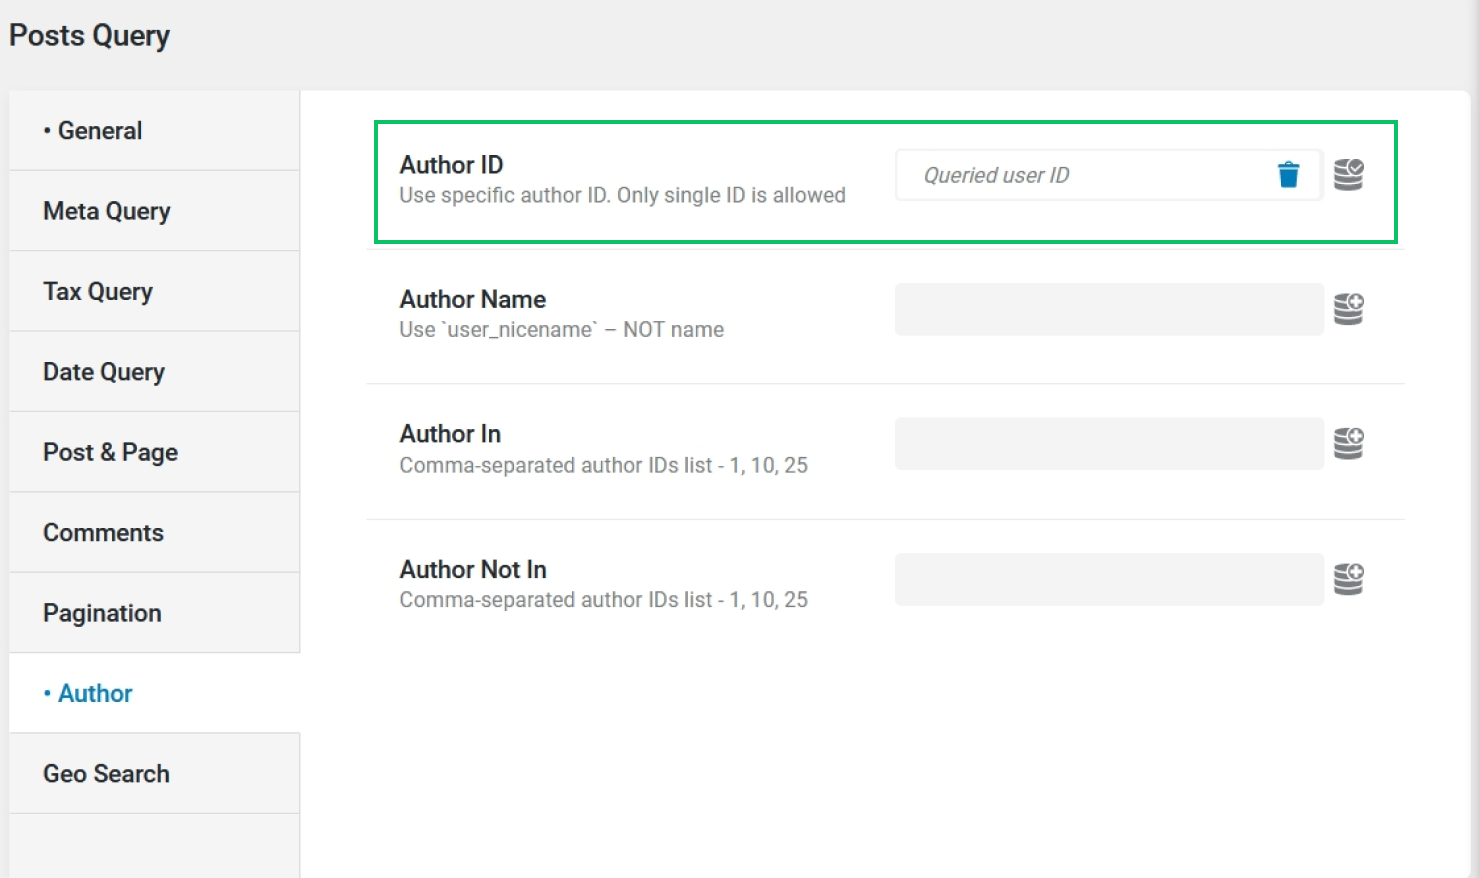 using queried user id macro to retrieve posts of the queried author